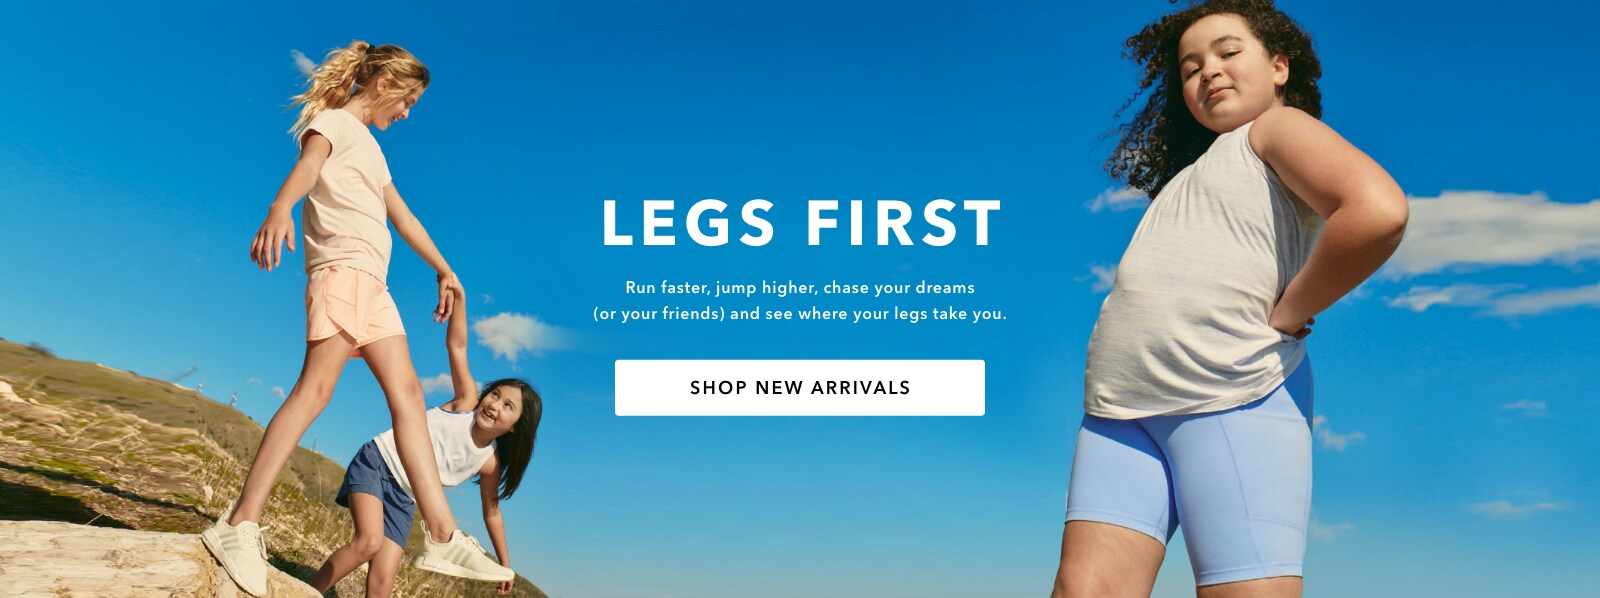 Campaign: Athleta Girl Legs first. Run faster, jump higher, chase your dreams (or your friends) and see where your legs take you. Shop New Arrivals